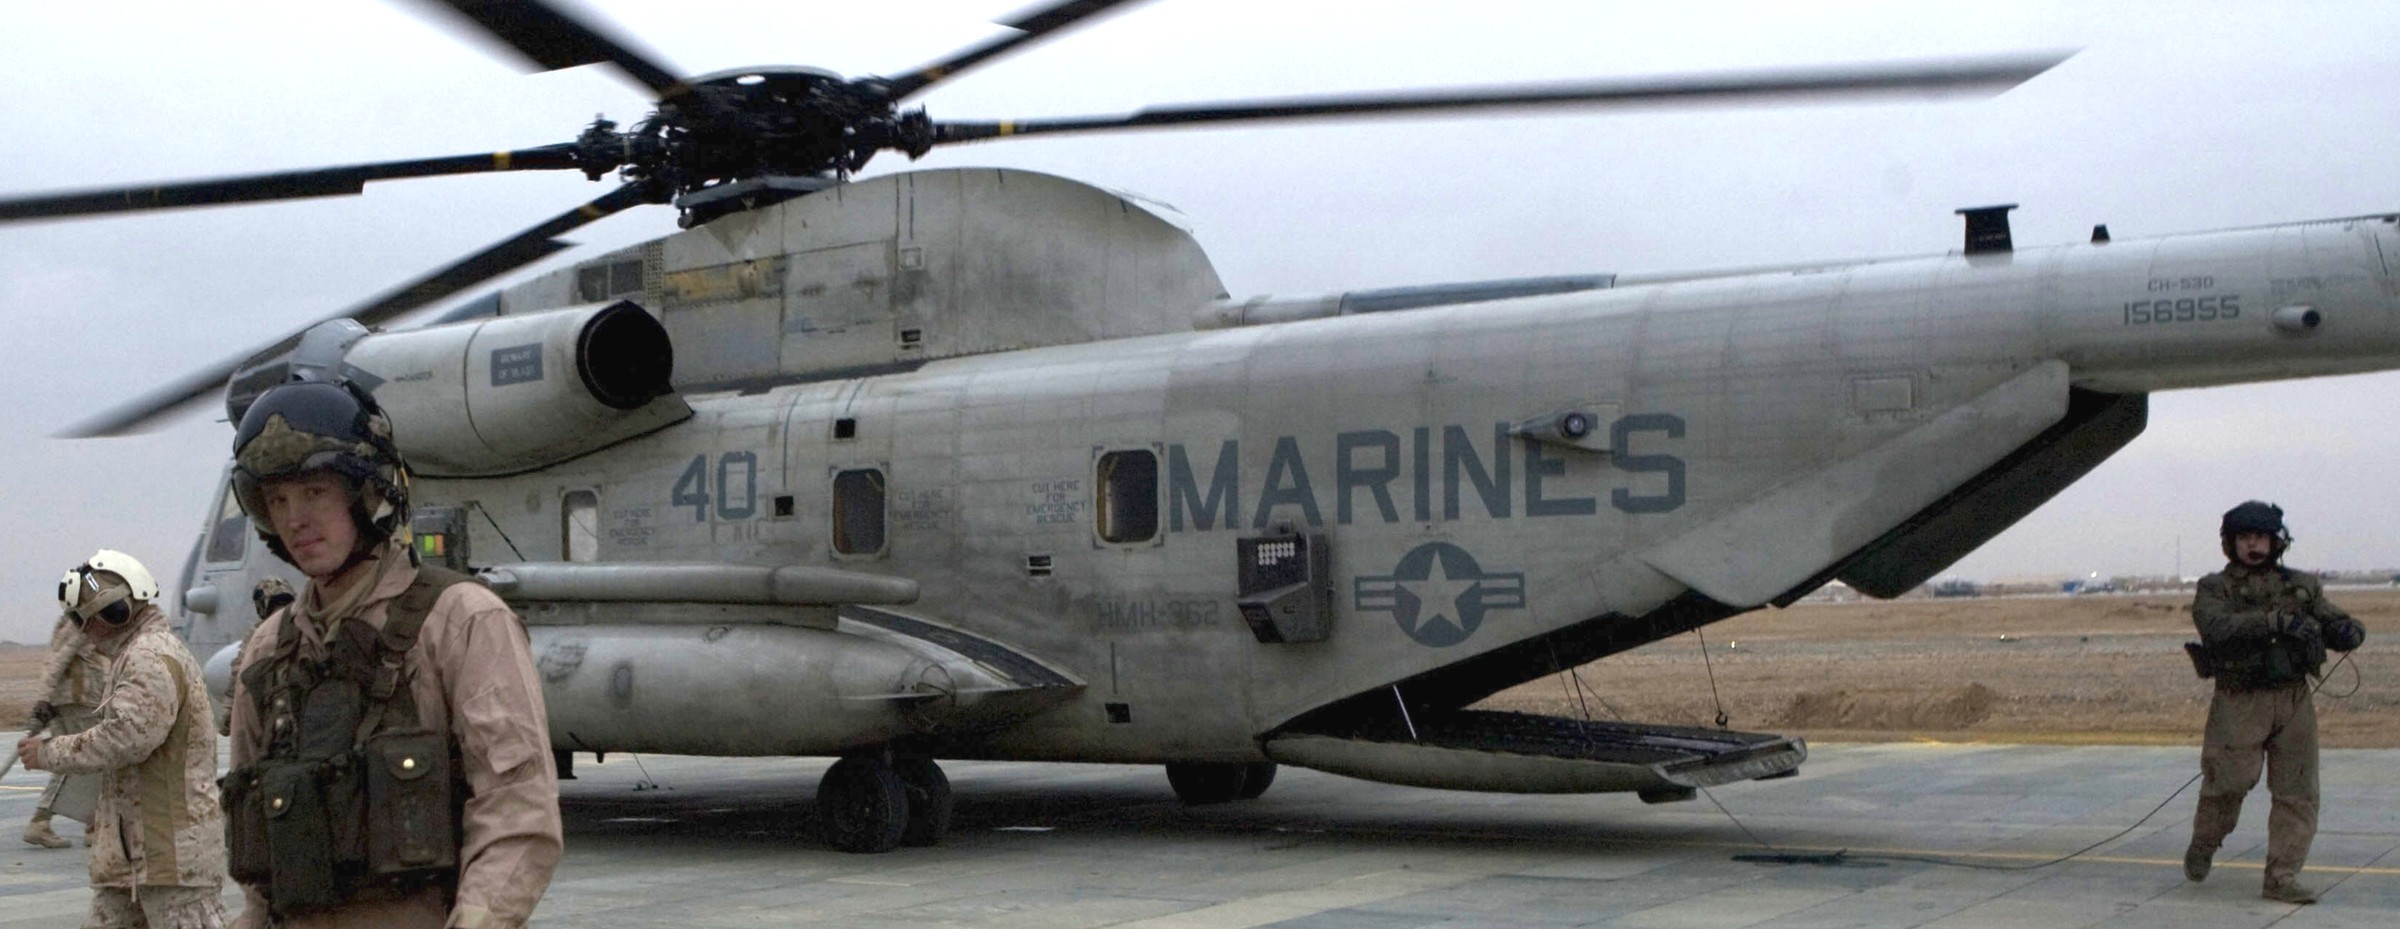 hmh-362 ugly angels marine heavy helicopter squadron usmc sikorsky ch-53d sea stallion 44